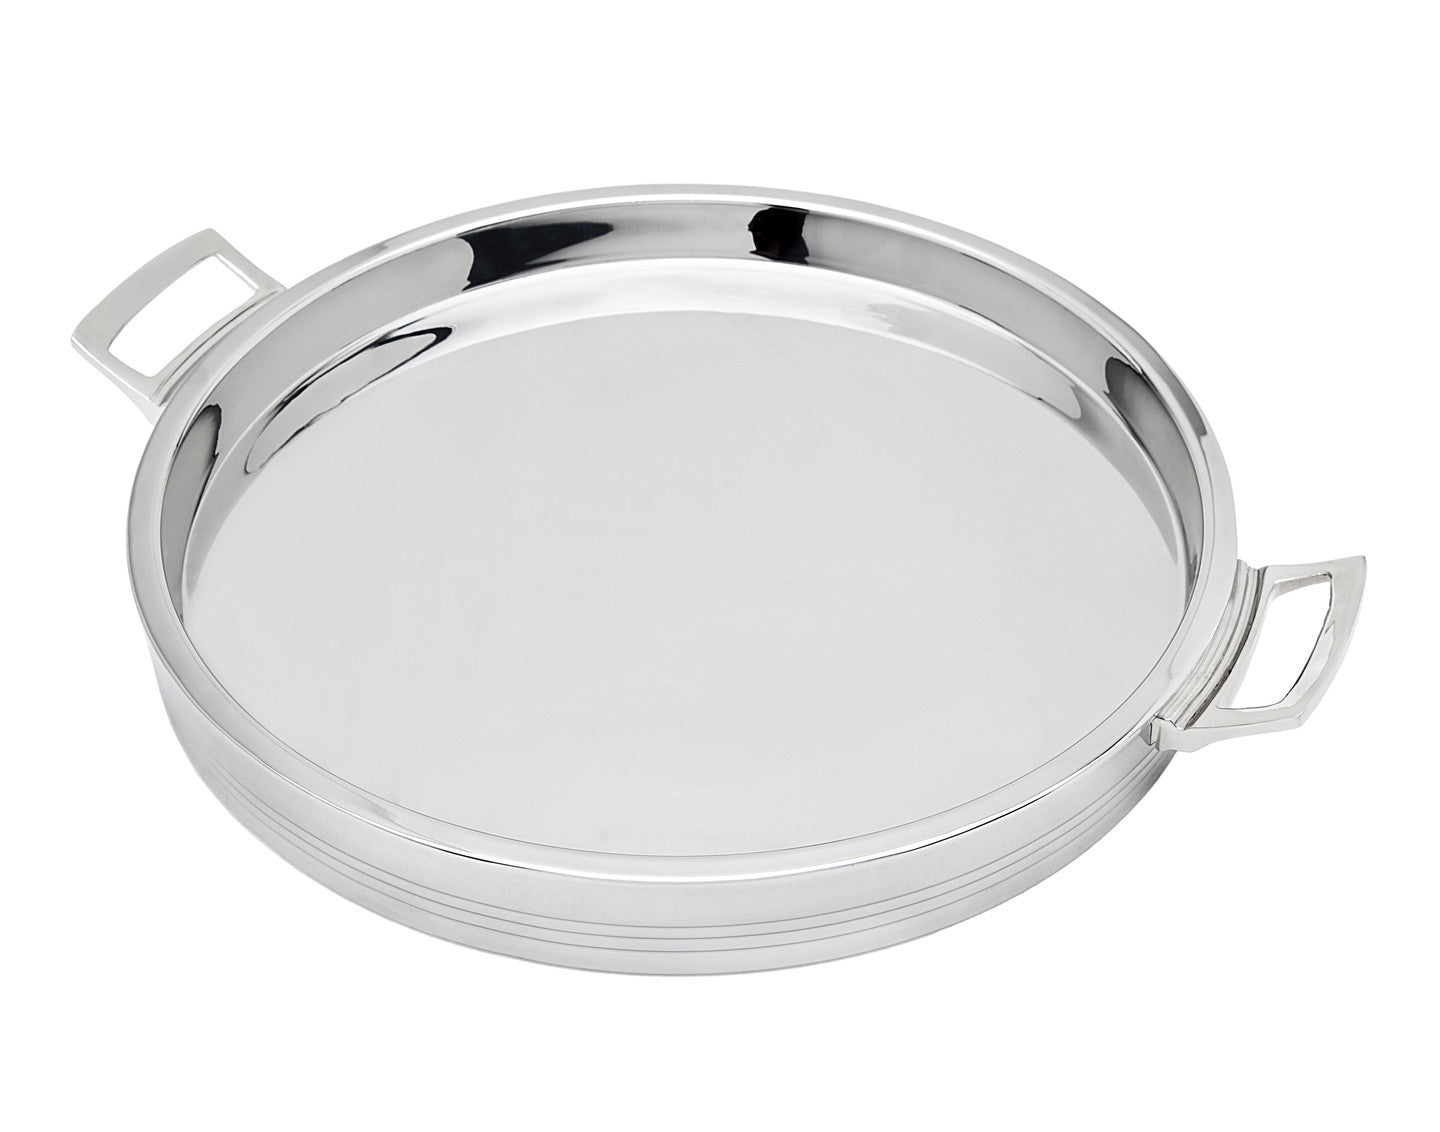 12" Silver Round Stainless Steel Tray With Handles